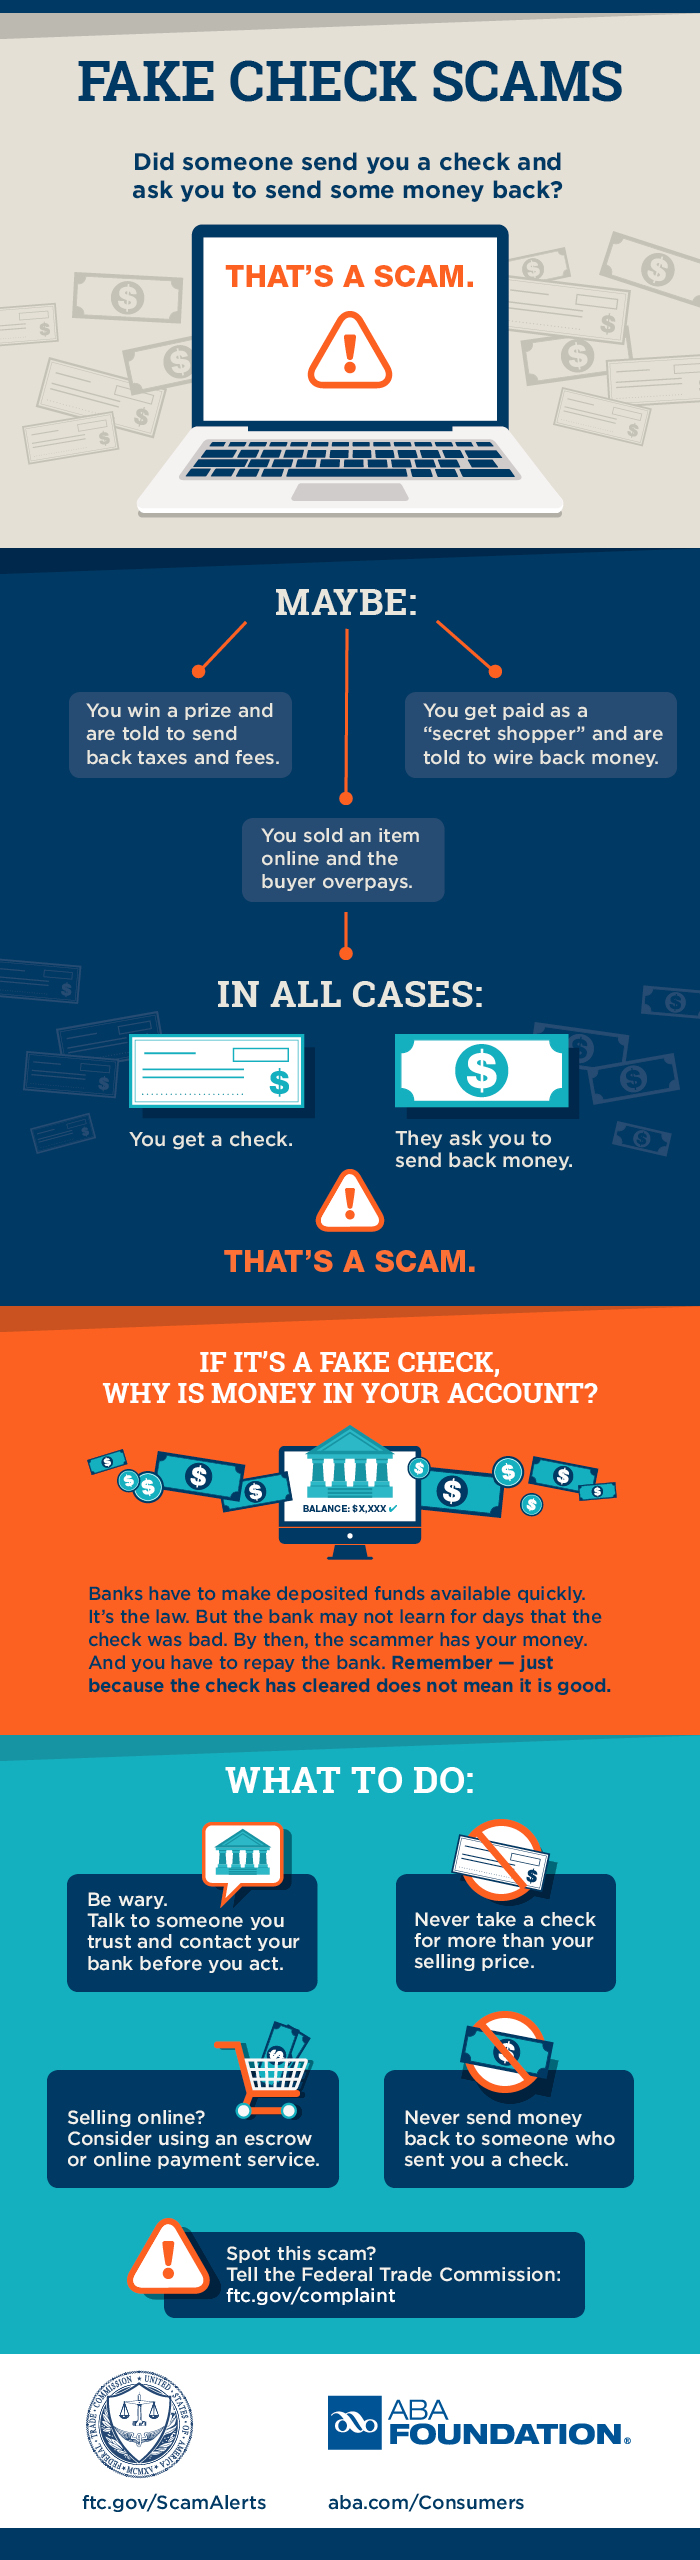 In all cases, it's a scam if someone sends you a check and then asks you to send back money. Remember, just because the check has cleared does not mean it is good. If you spot a scam tell the Federal Trade Commission ftc.gov/complaint.